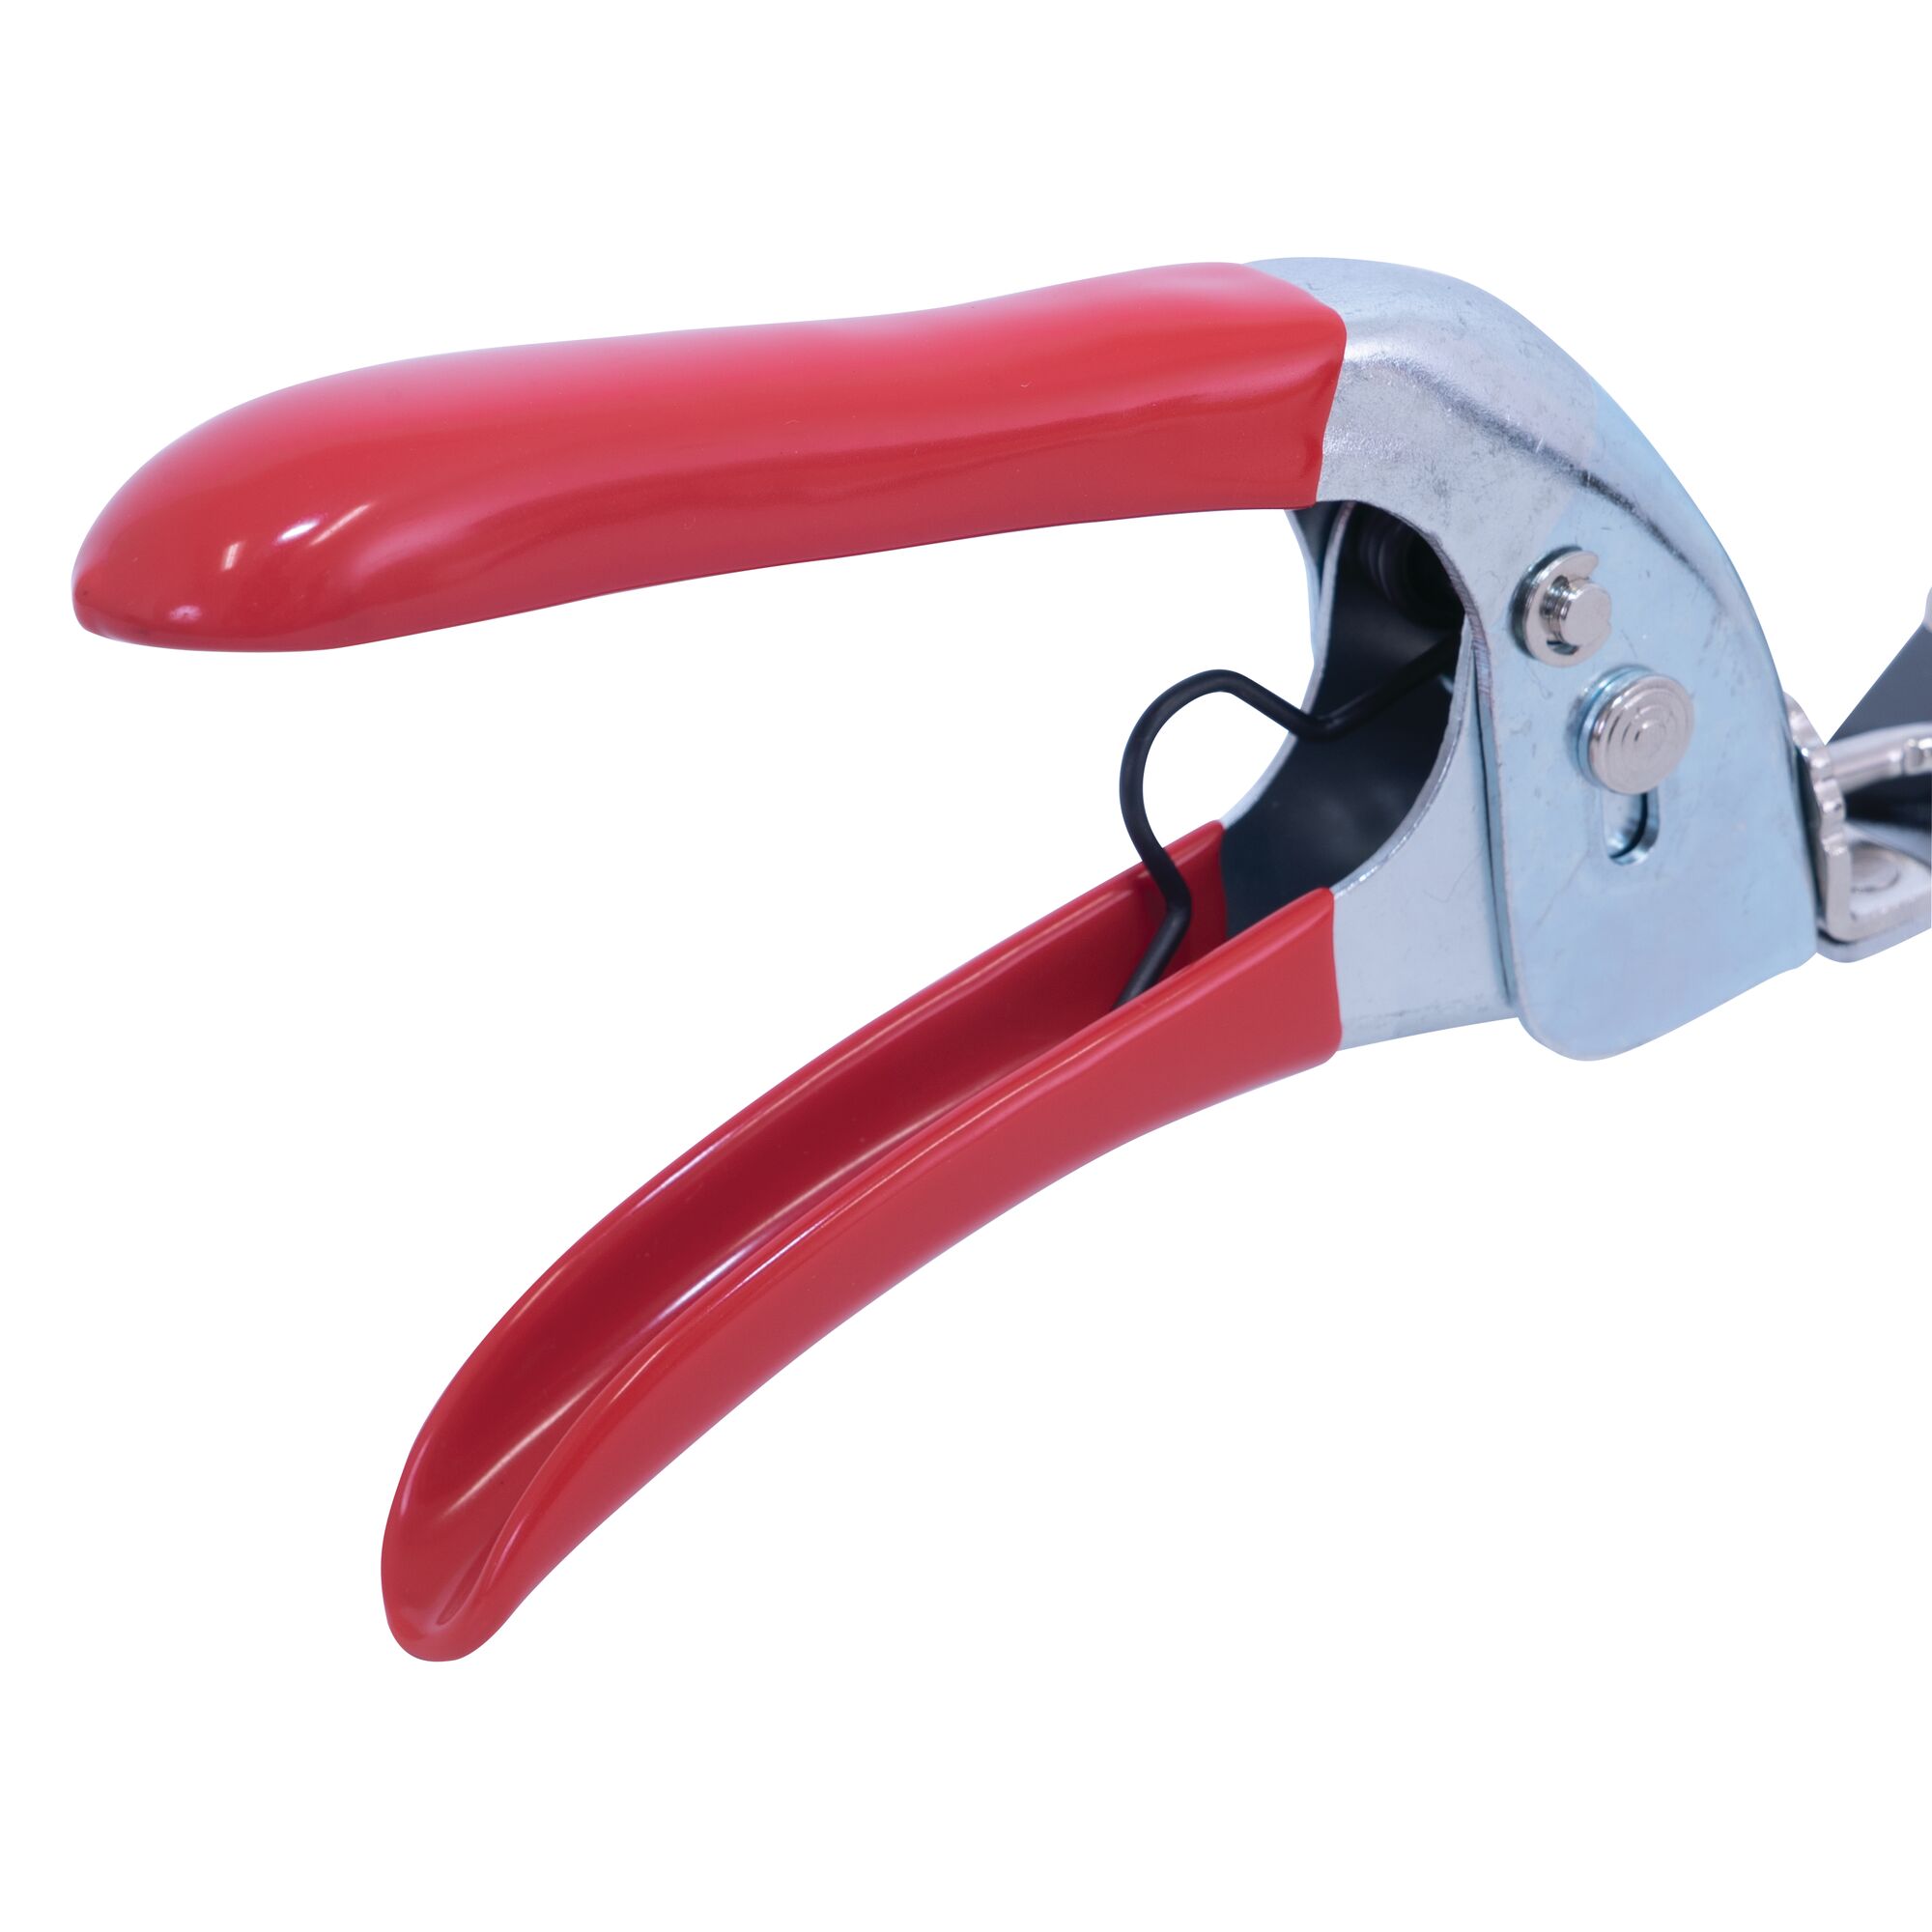 Soft-touch grip handle feature of swivel grass shears.